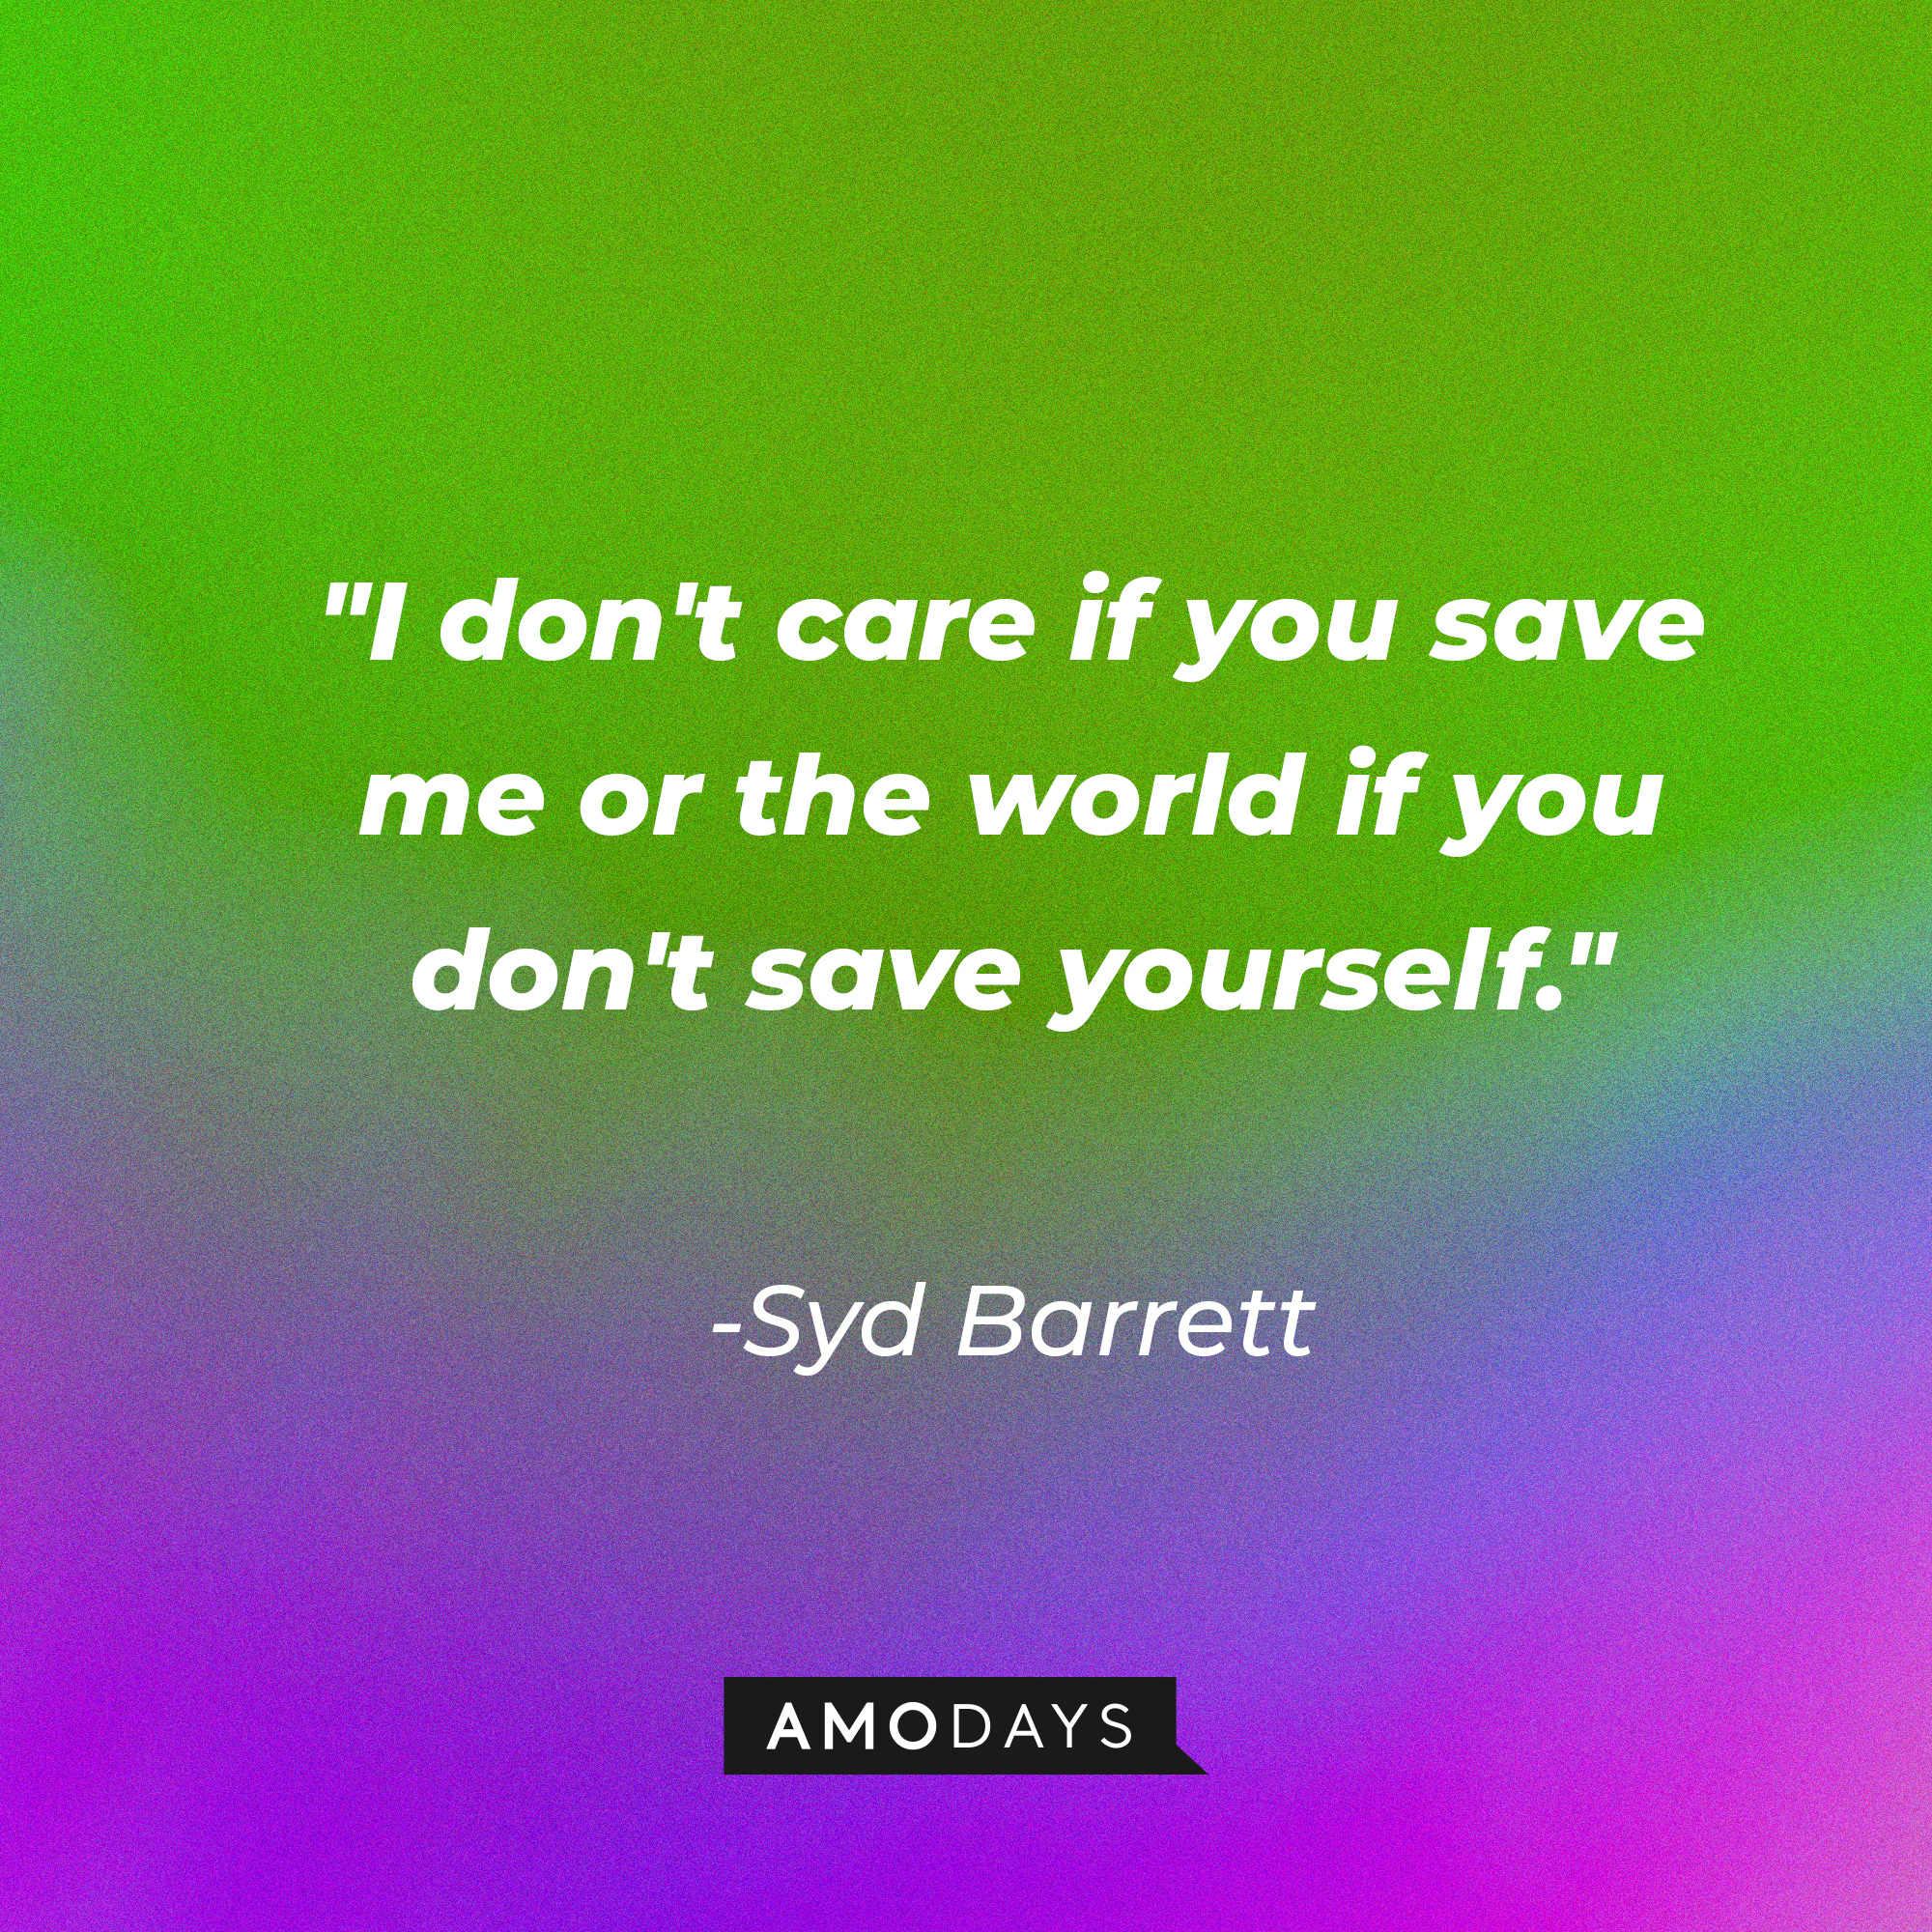 Syd Barrett's quote: "I don't care if you save me or the world if you don't save yourself." | Image: AmoDays